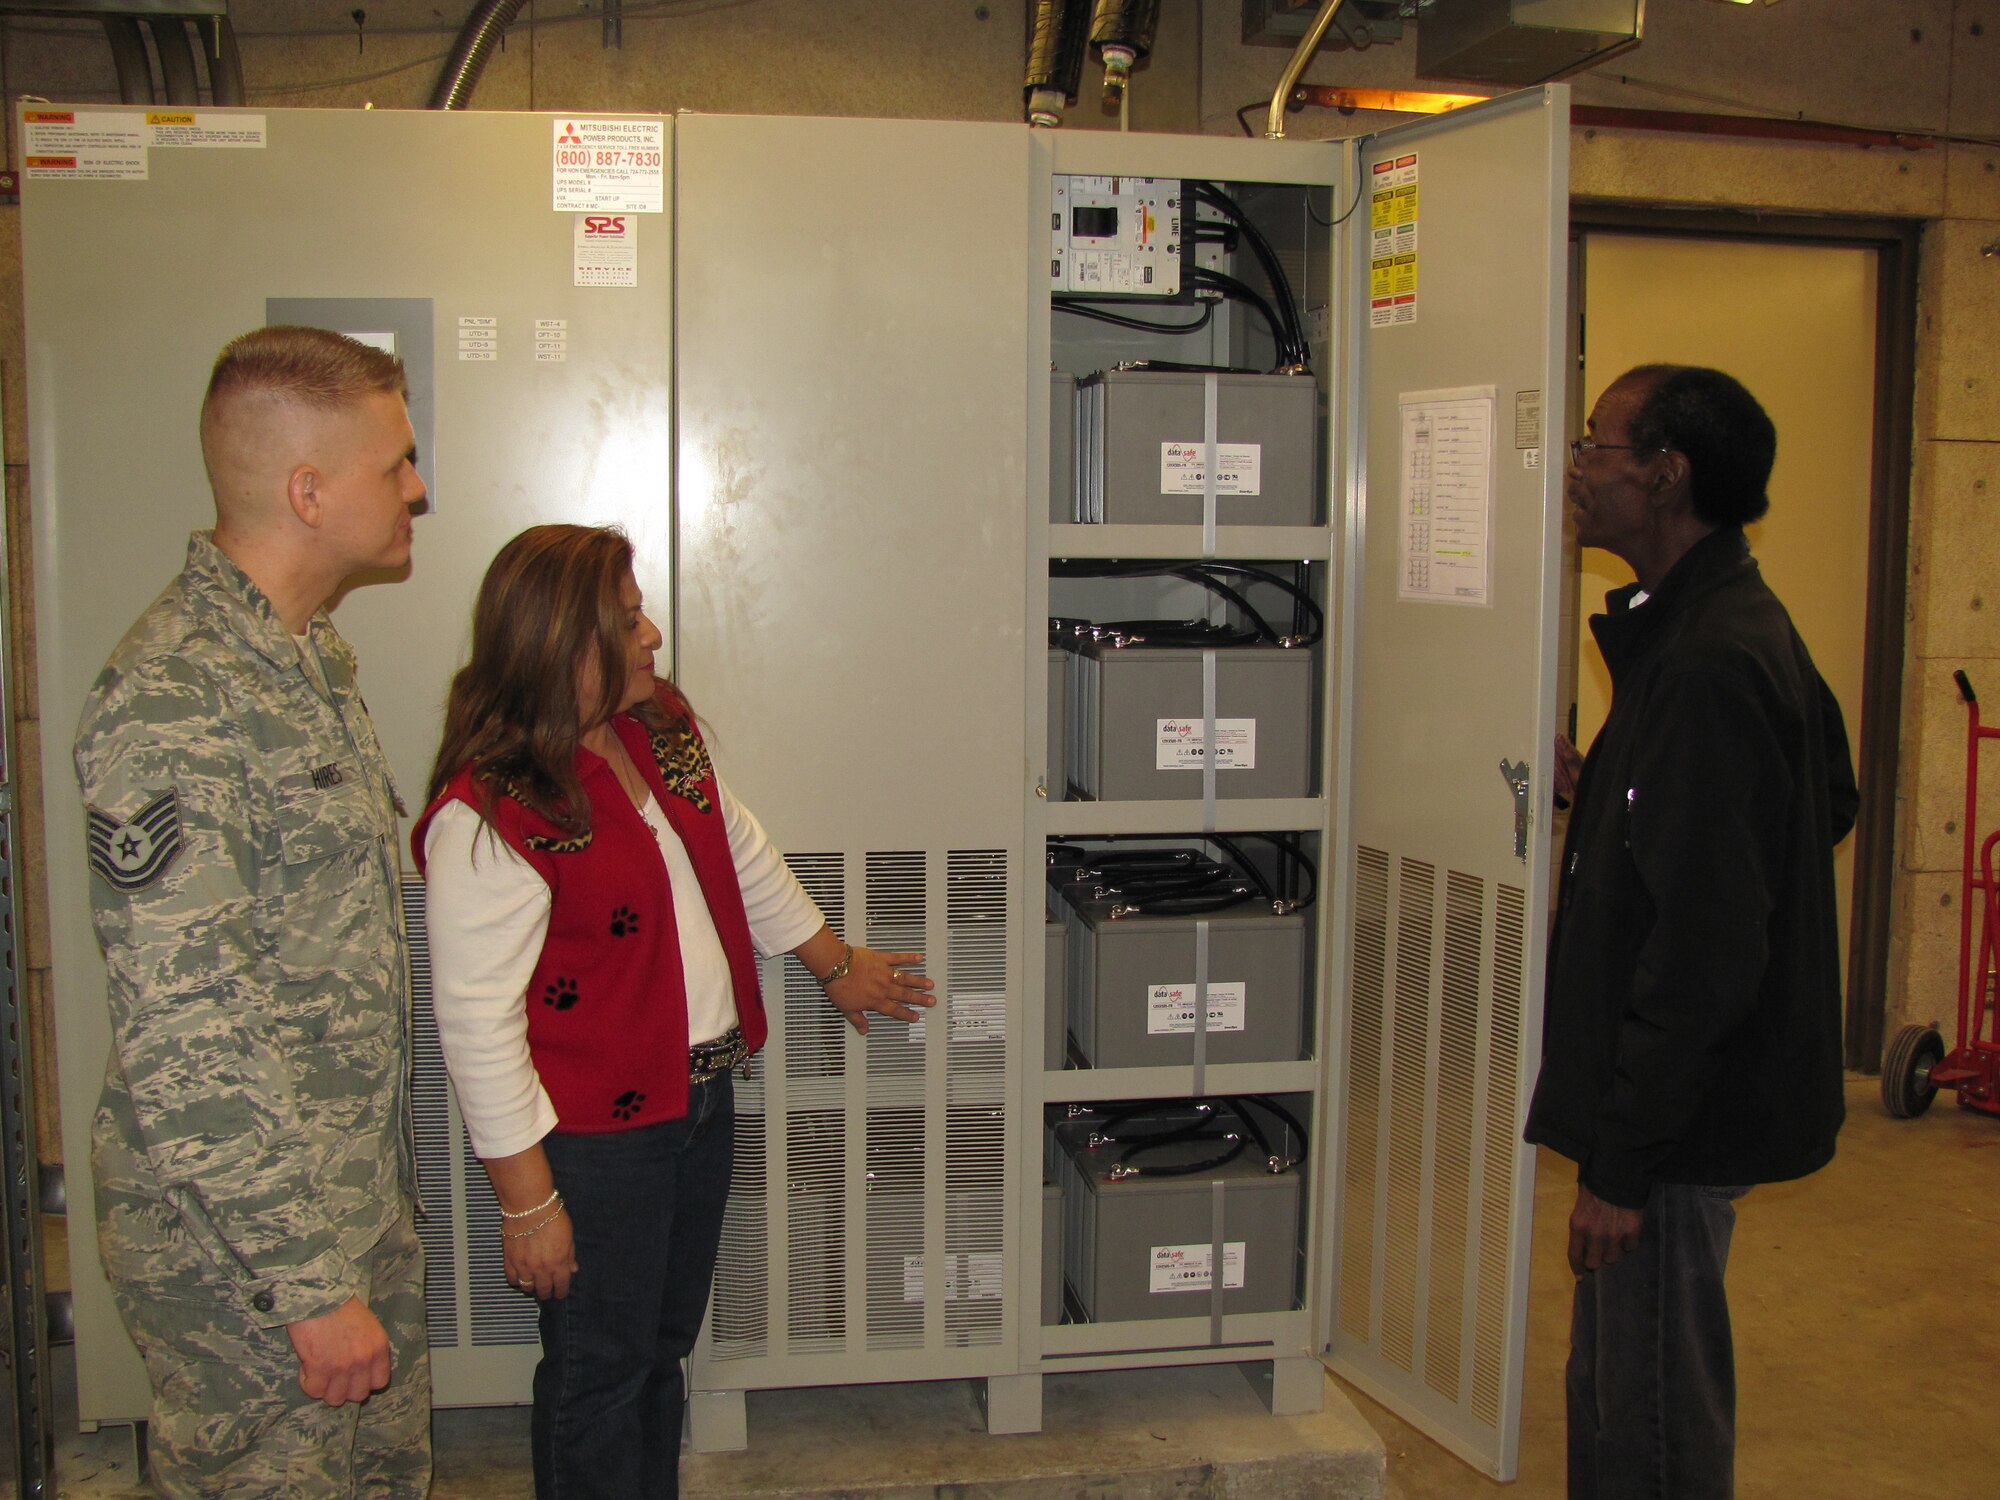 LAUGHLIN AIR FORCE BASE, TEXAS - John Freeman, 47th Operations Group, shows off Laughlin’s new Uninterruptable Power Supply system to Sylvia Garza and Tech Sgt. Shawn Hires, both of the 47th Contracting Squadron. All three were key in Laughlin’s purchase of the new system that powers the flight simulators here if the main power source goes down. (U.S. Air Force Photo by 2nd Lt. Travis Antoniono)